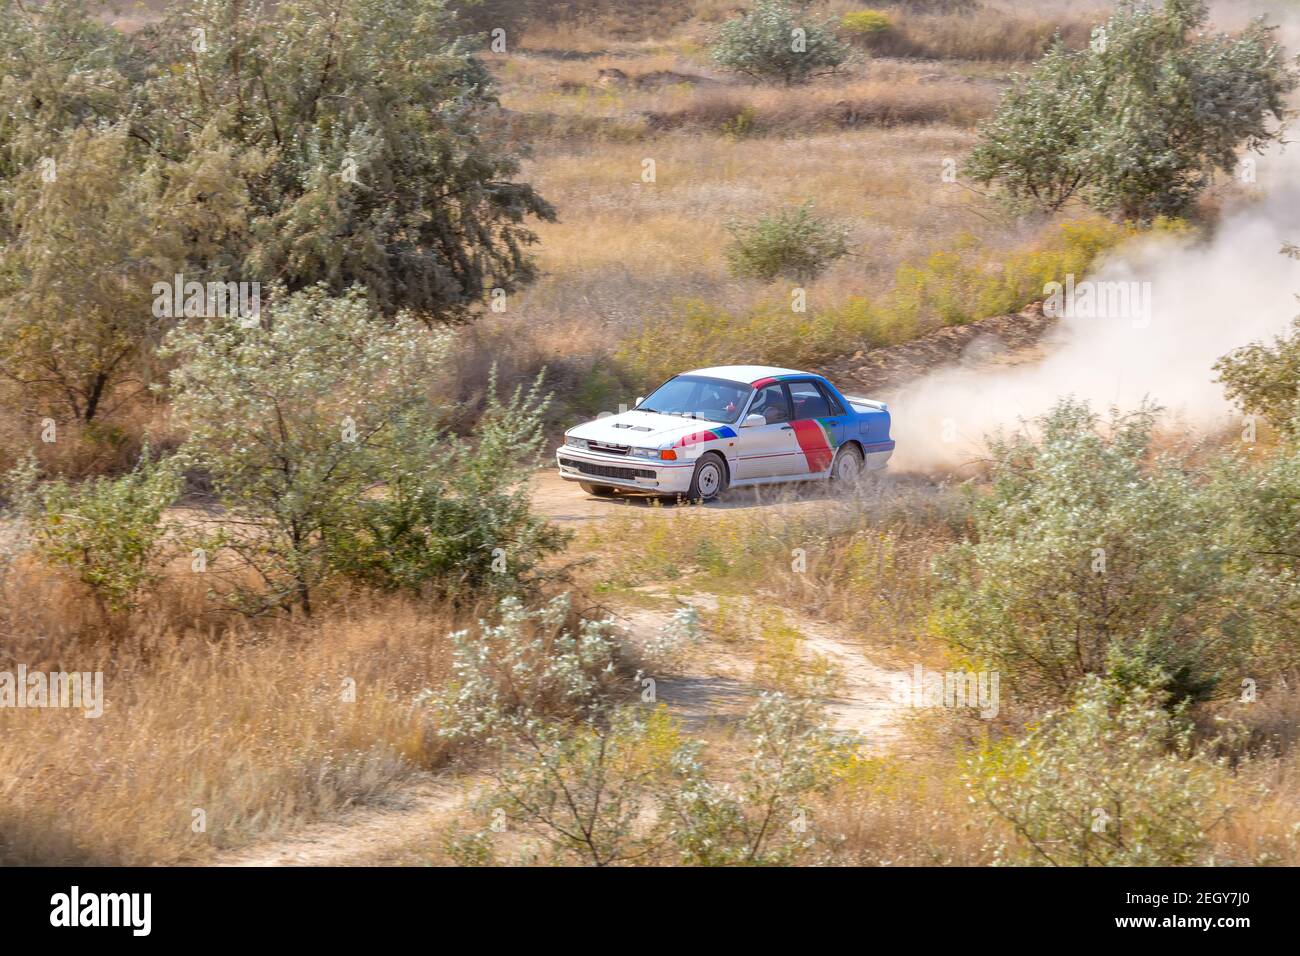 Sunny summer day. Dusty rally track. Sports car does a lot of dust in turn 04 Stock Photo